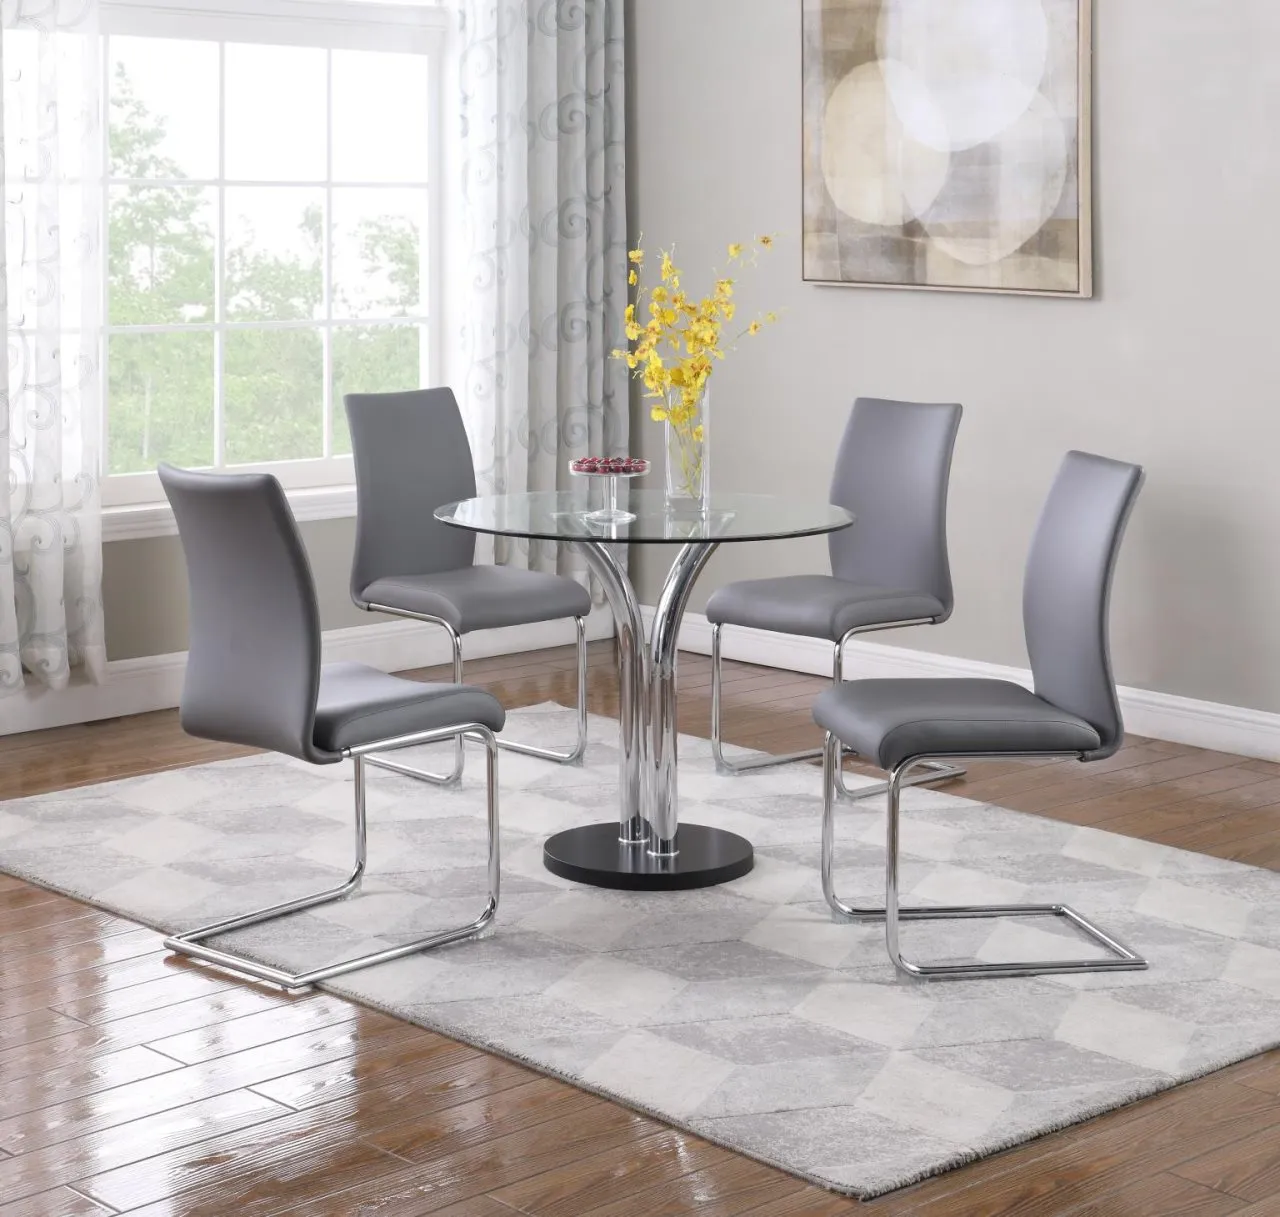 GREY DINING SET WITH GLASS TOP BISTRO TABLE & 4 CANTILEVER SIDE CHAIRS